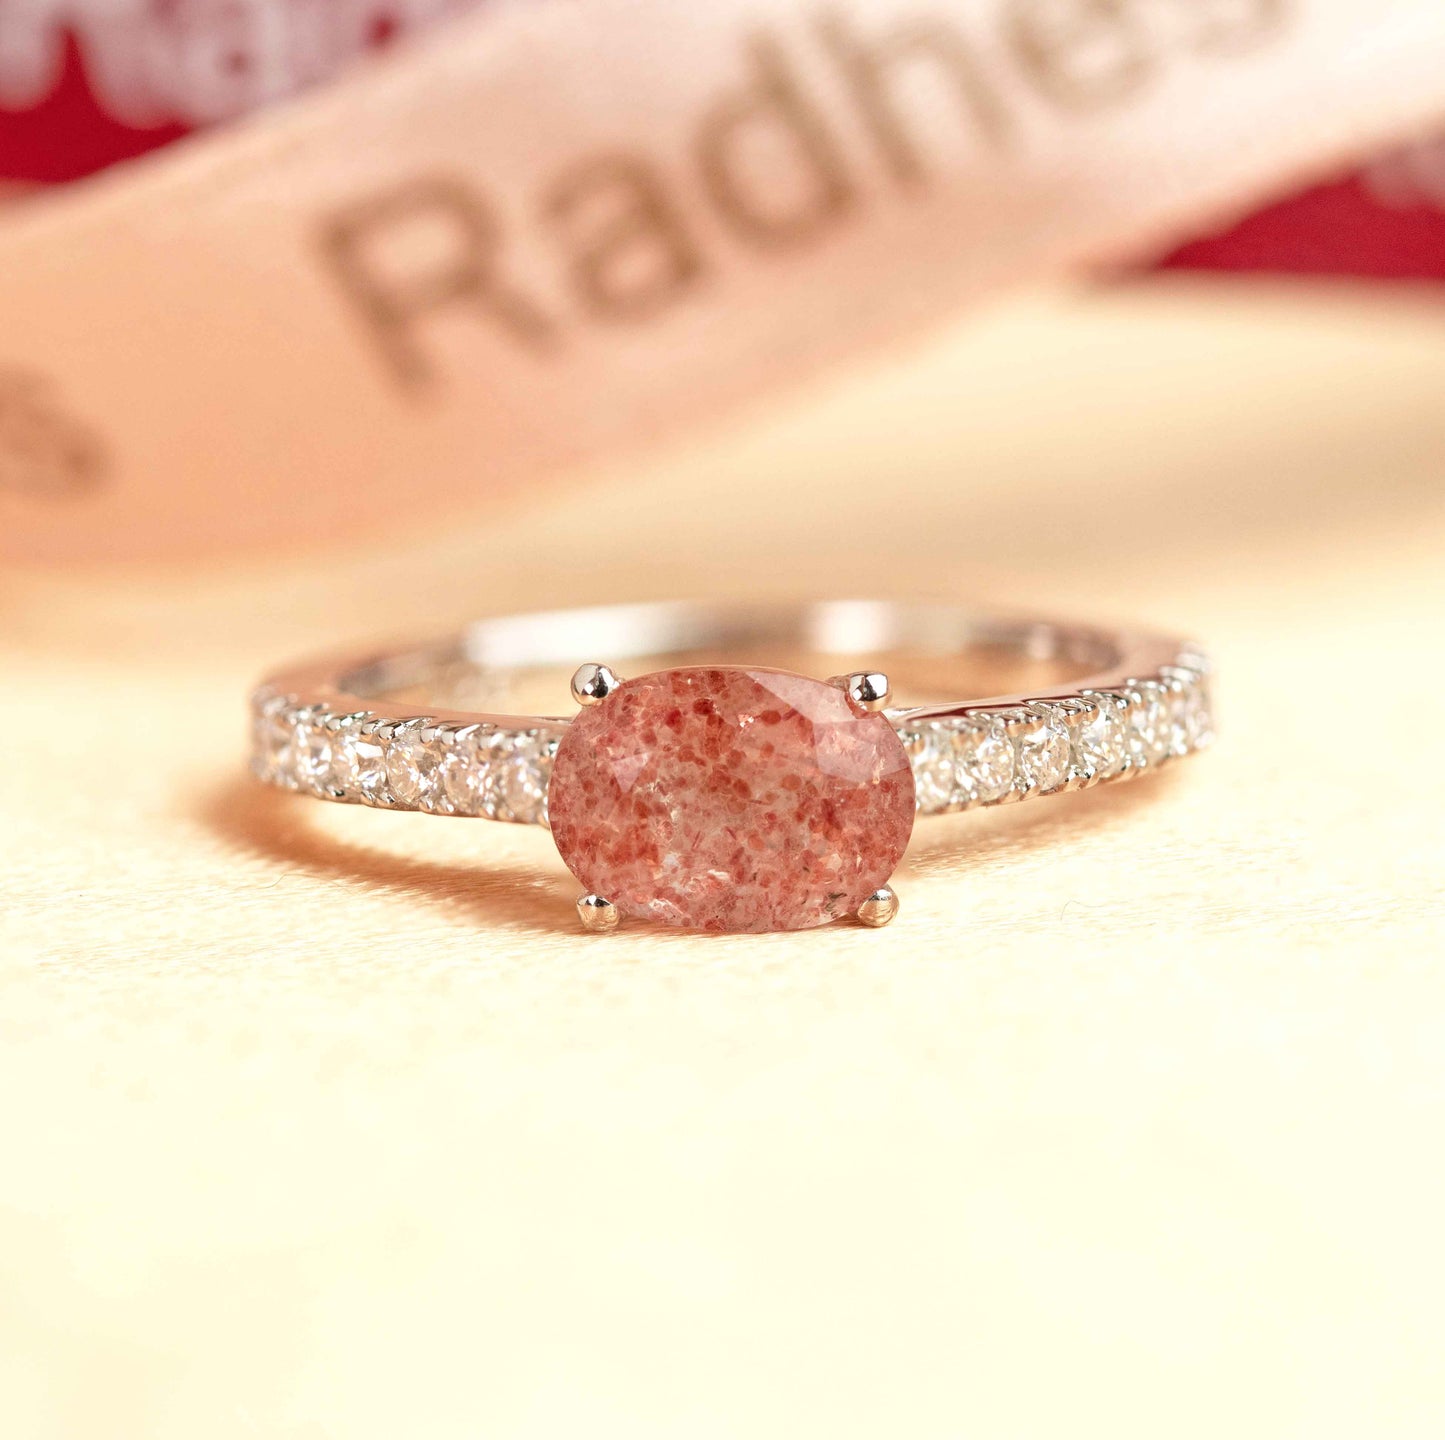 Horizontal 1.25 carat Oval Cut Red Strawberry Quartz and Diamond Semi-pave Solitaire Promise Ring in White Gold